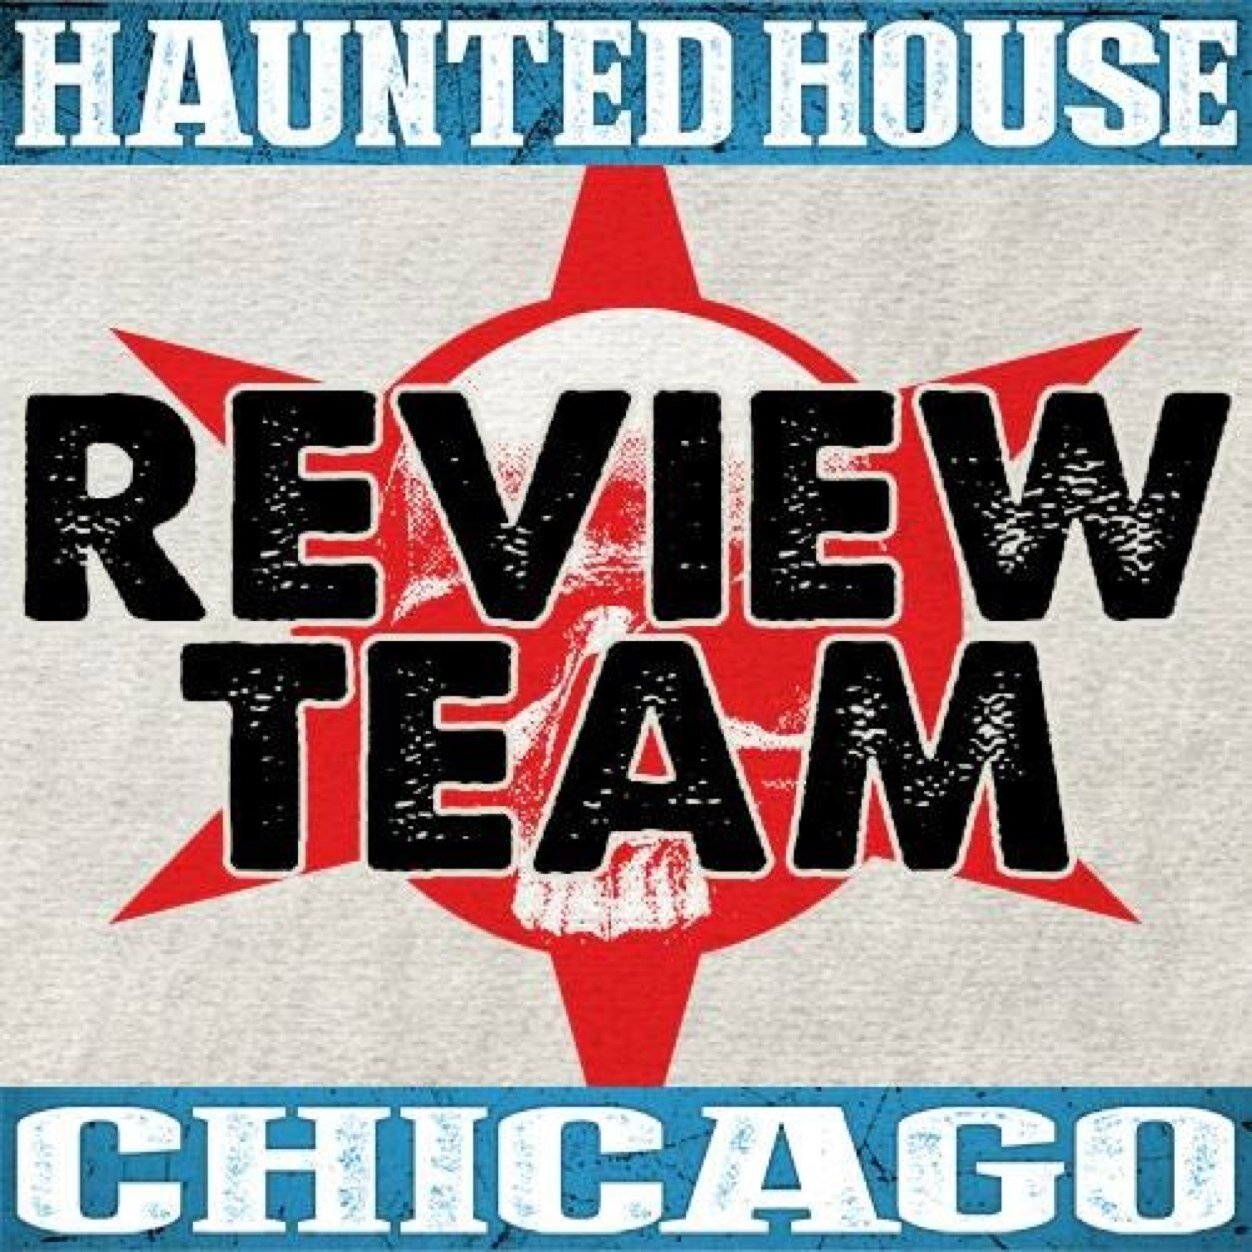 The Review Team for HauntedHouseChicago, your #1 source for haunted attractions in Chicagoland! See also @HauntedChicago